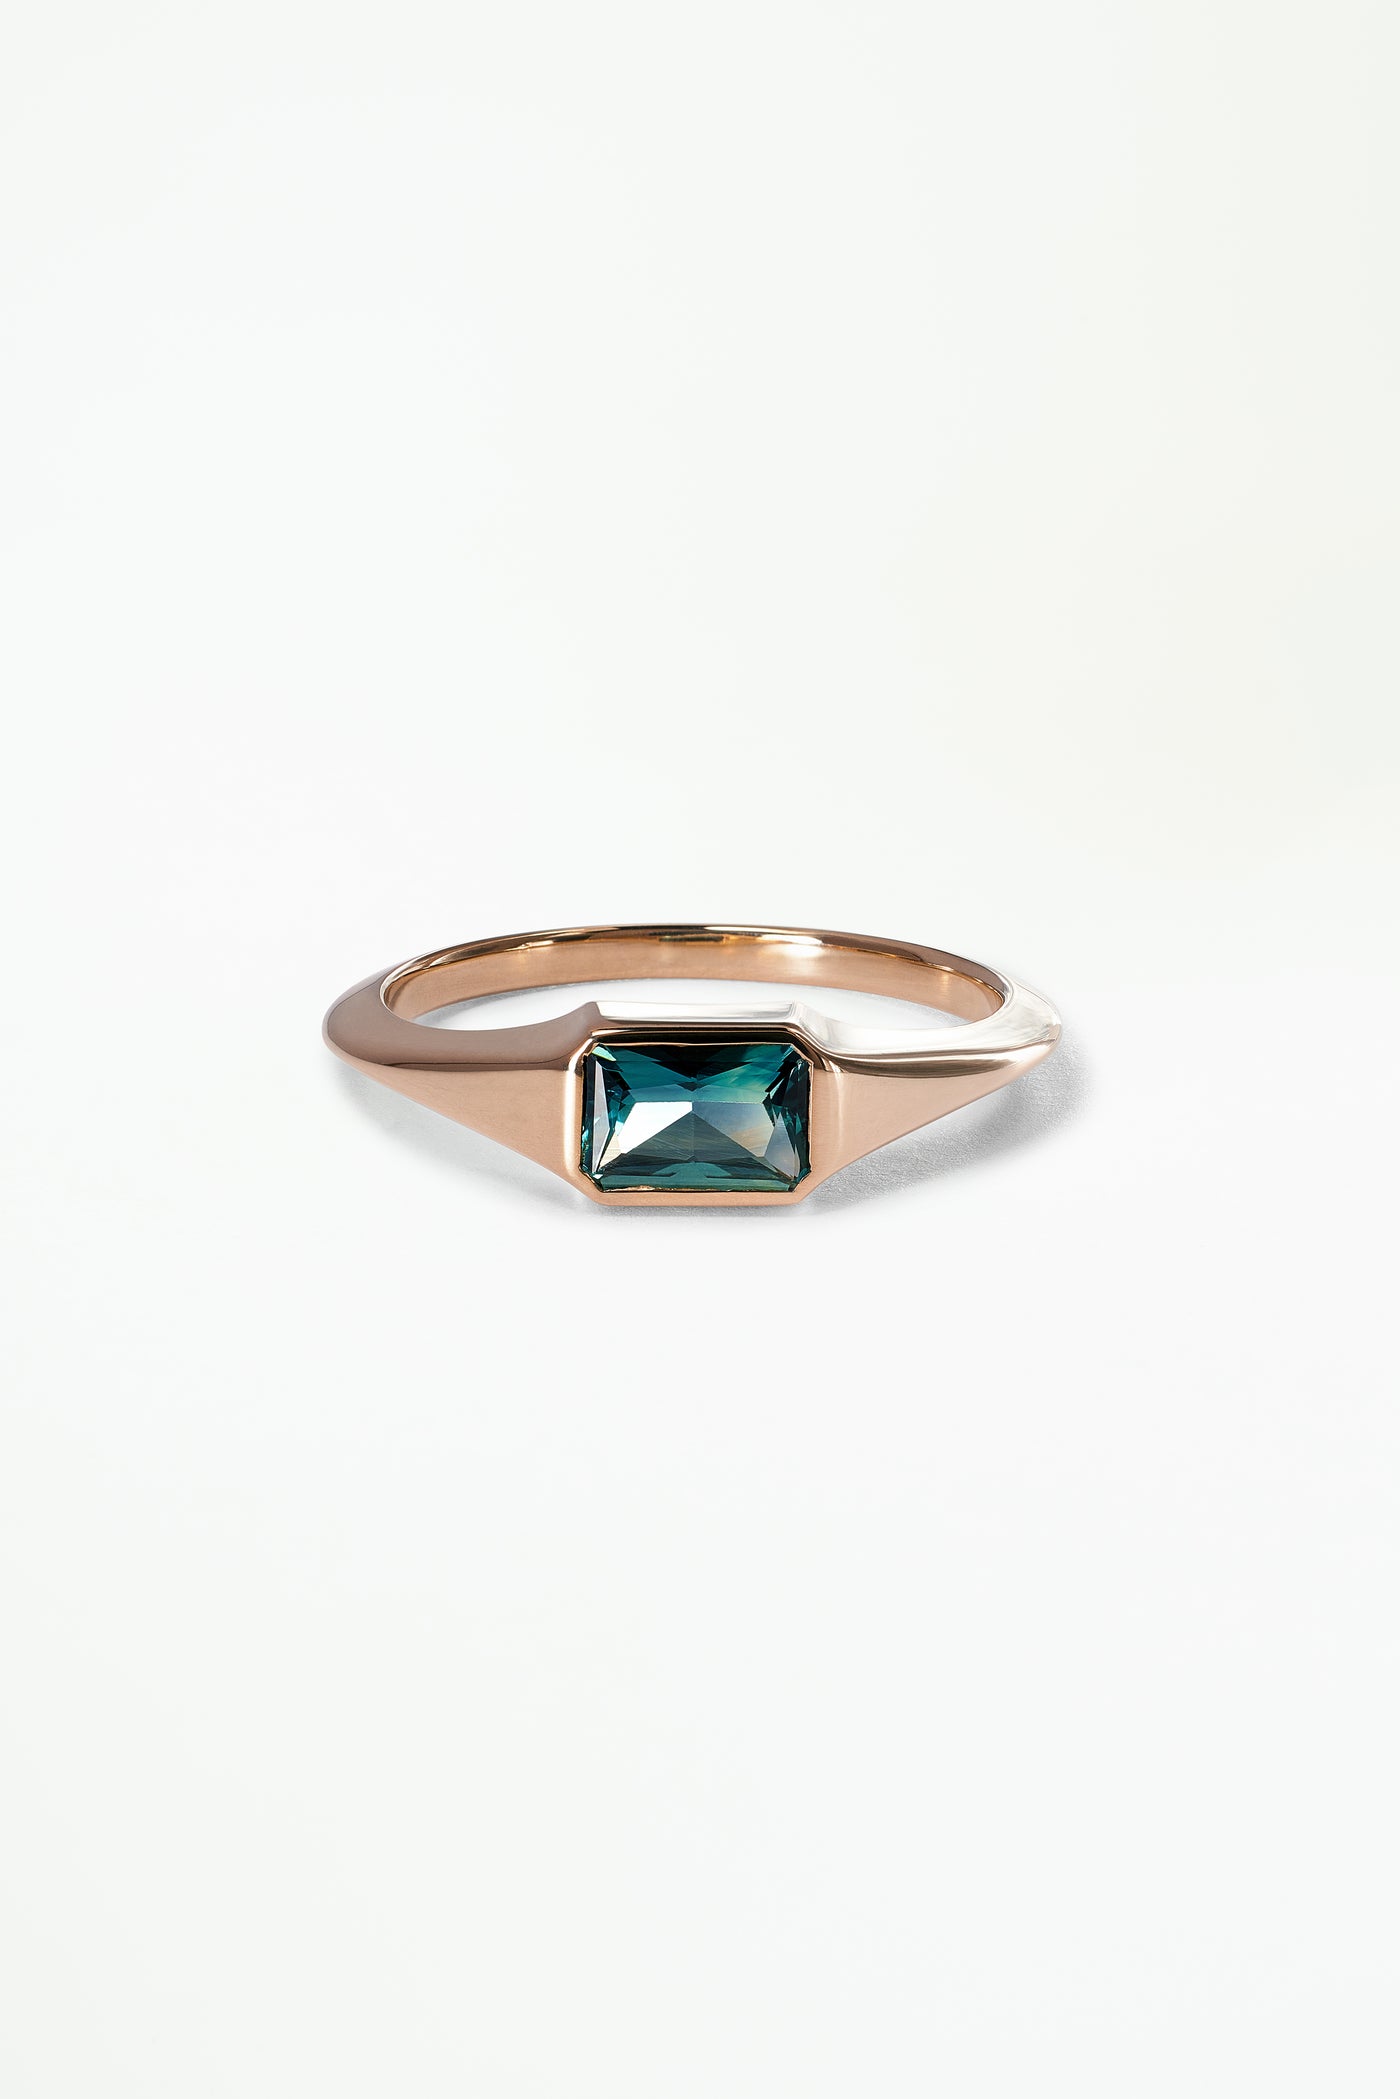 One of a Kind Radiant Cut Teal Sapphire Signet Ring No. 60